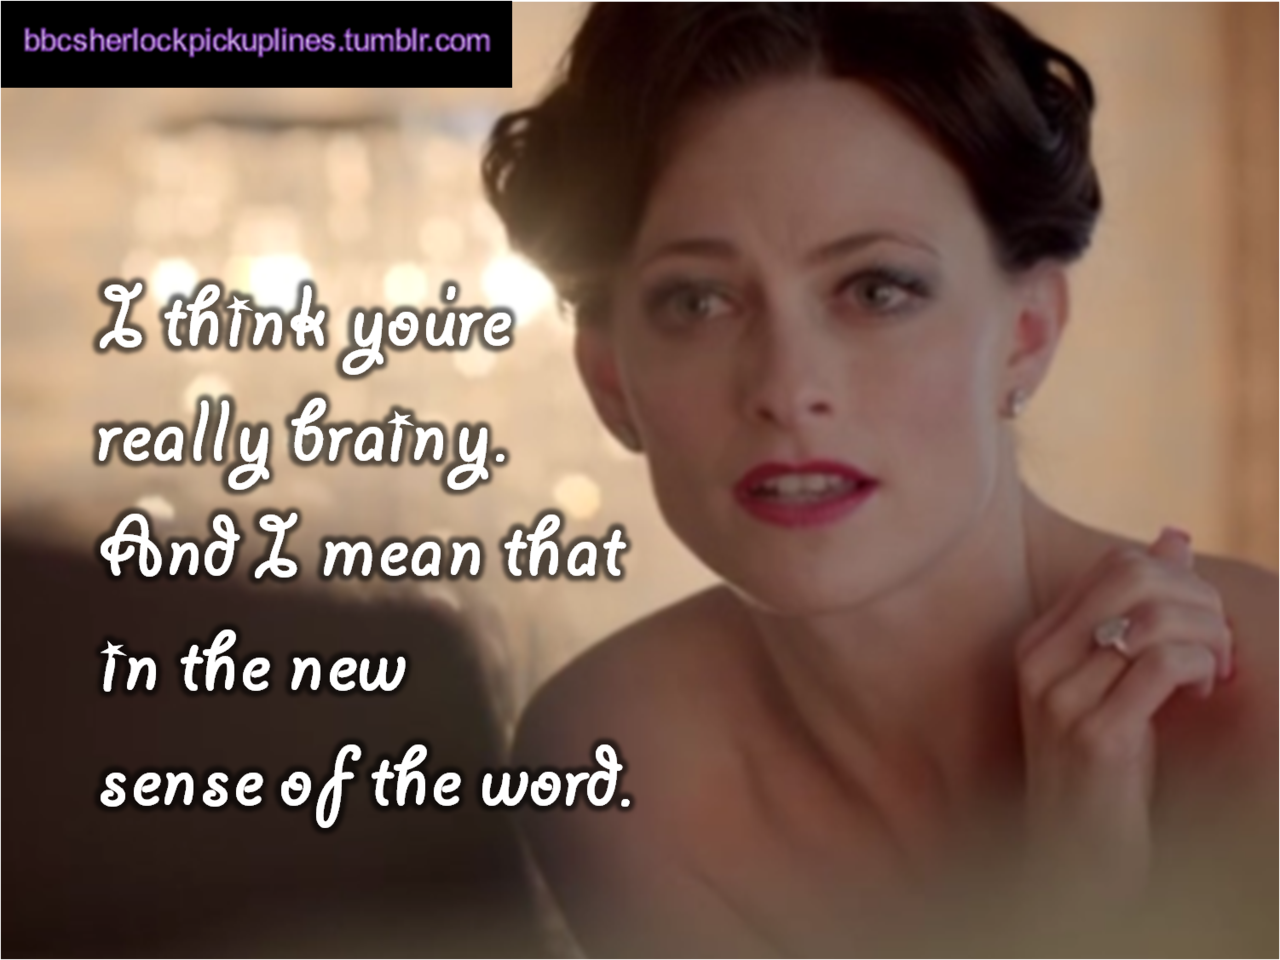 &ldquo;I think you&rsquo;re really brainy. And I mean that in the new sense